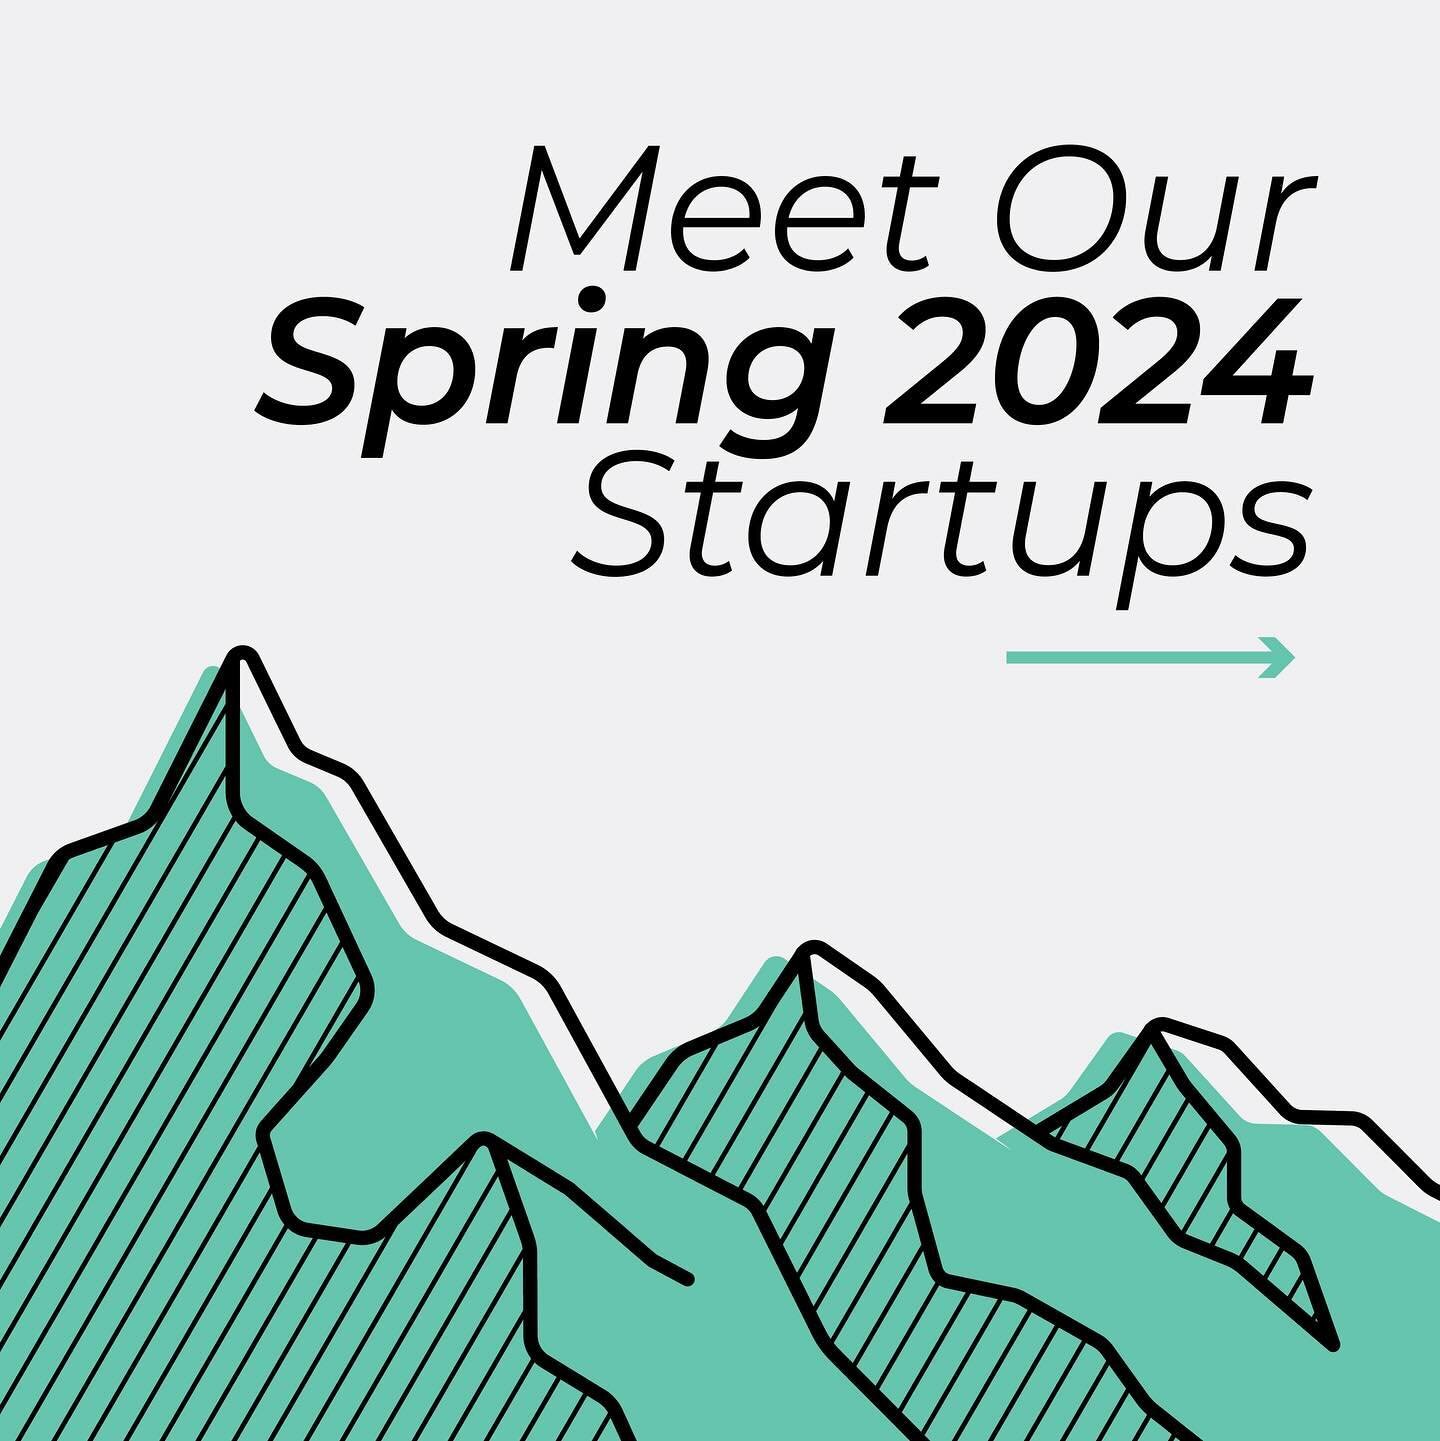 Introducing our Spring 2024 Startup Cohort! This semester, we are working with 5 LaunchPad startups and 5 Venture Accelerator startups.
We are confident that these startups have the potential to significantly develop and scale in the 10 weeks they sp